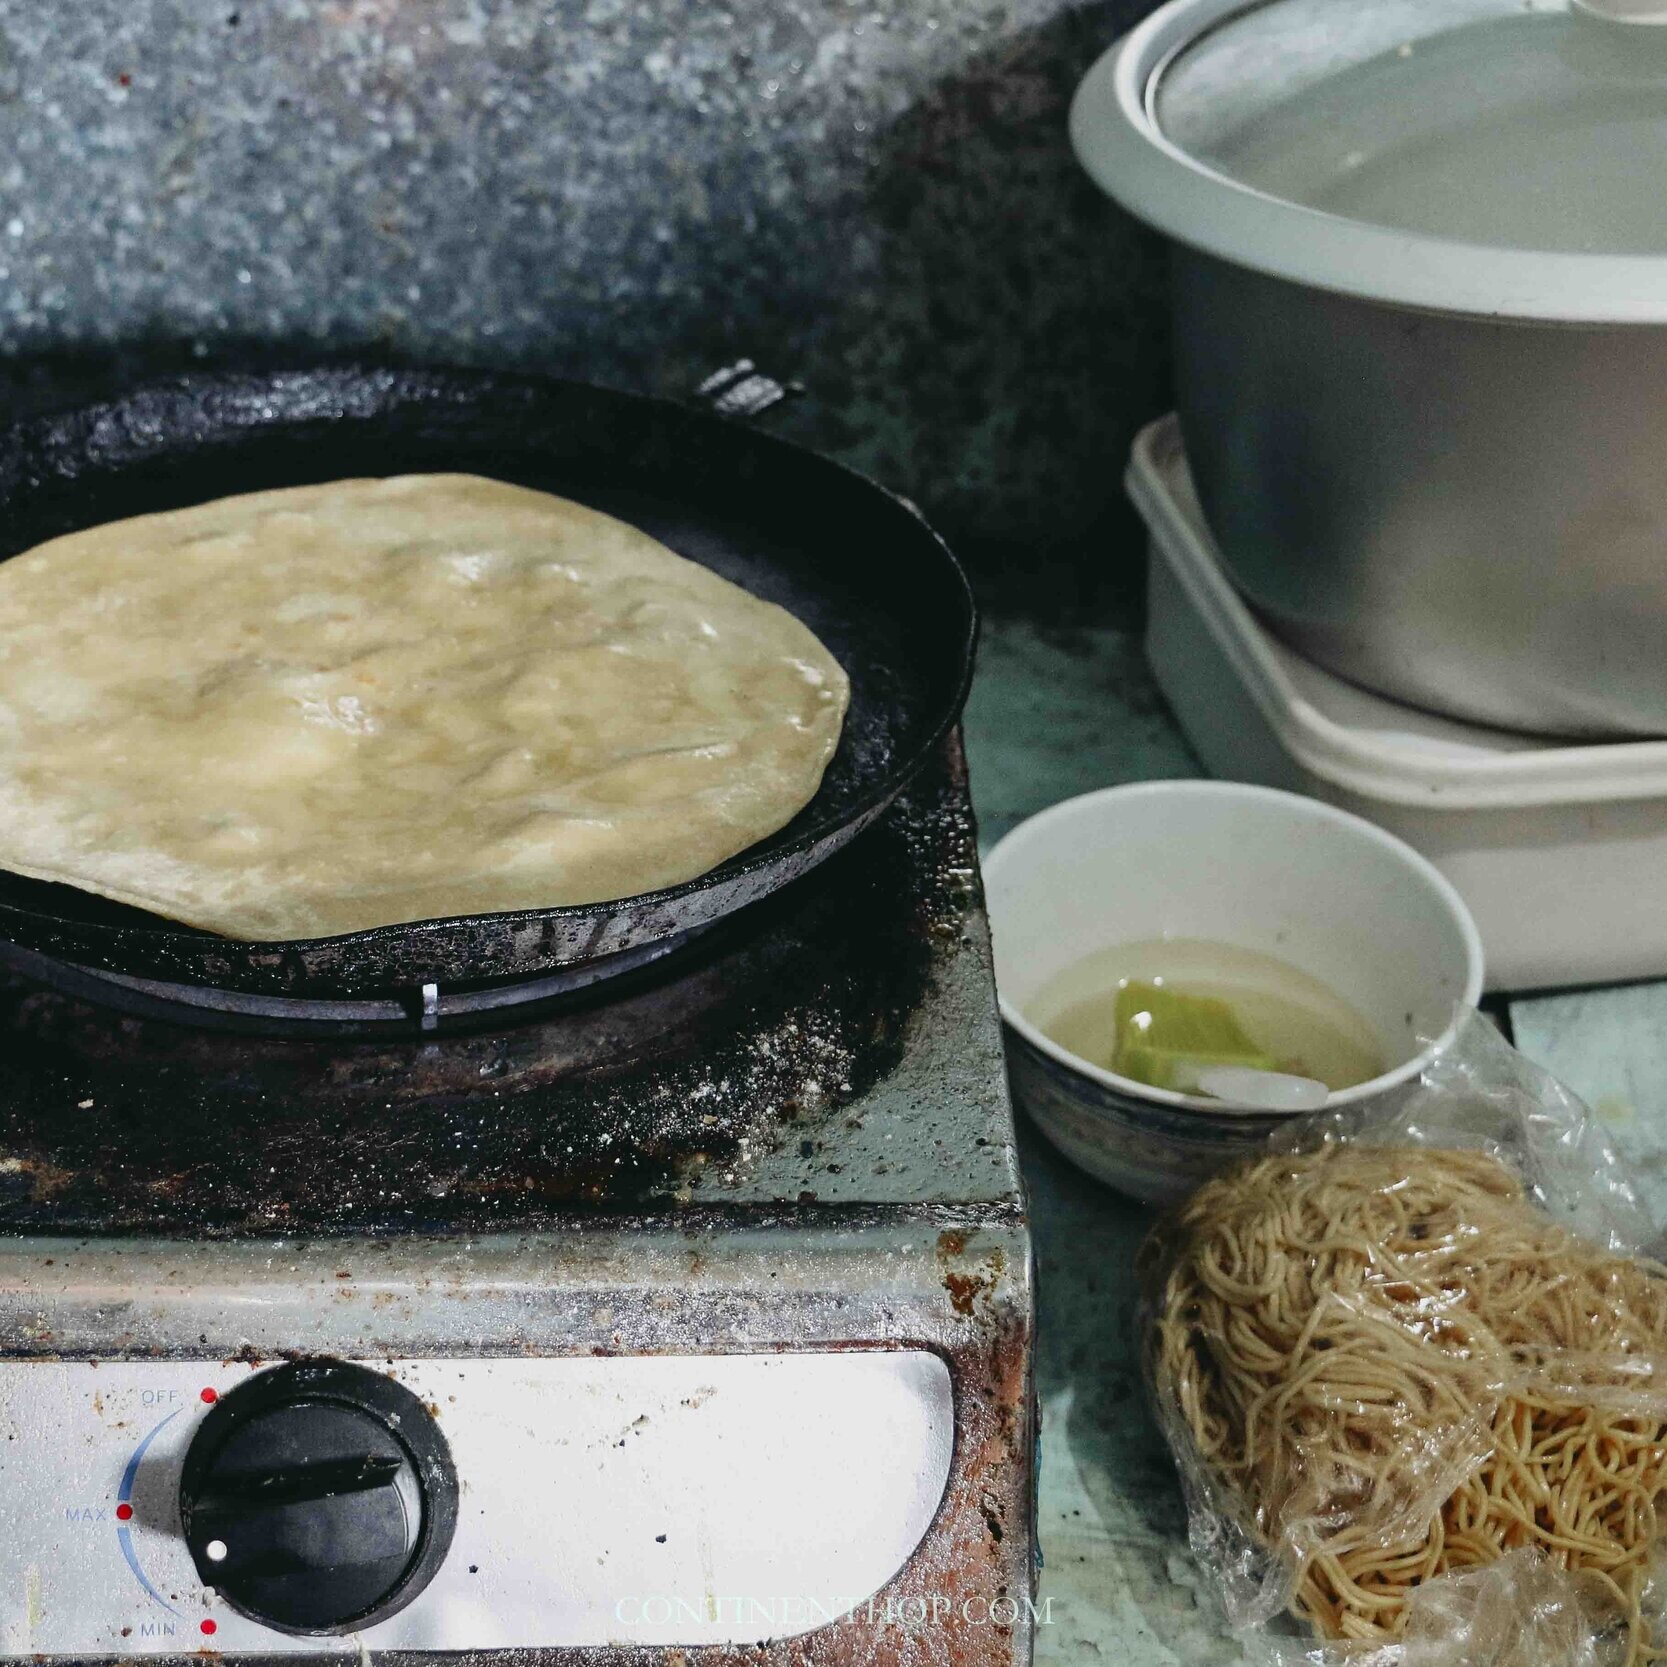 Mauritius traditional food Dholl puri being roasted on a pan